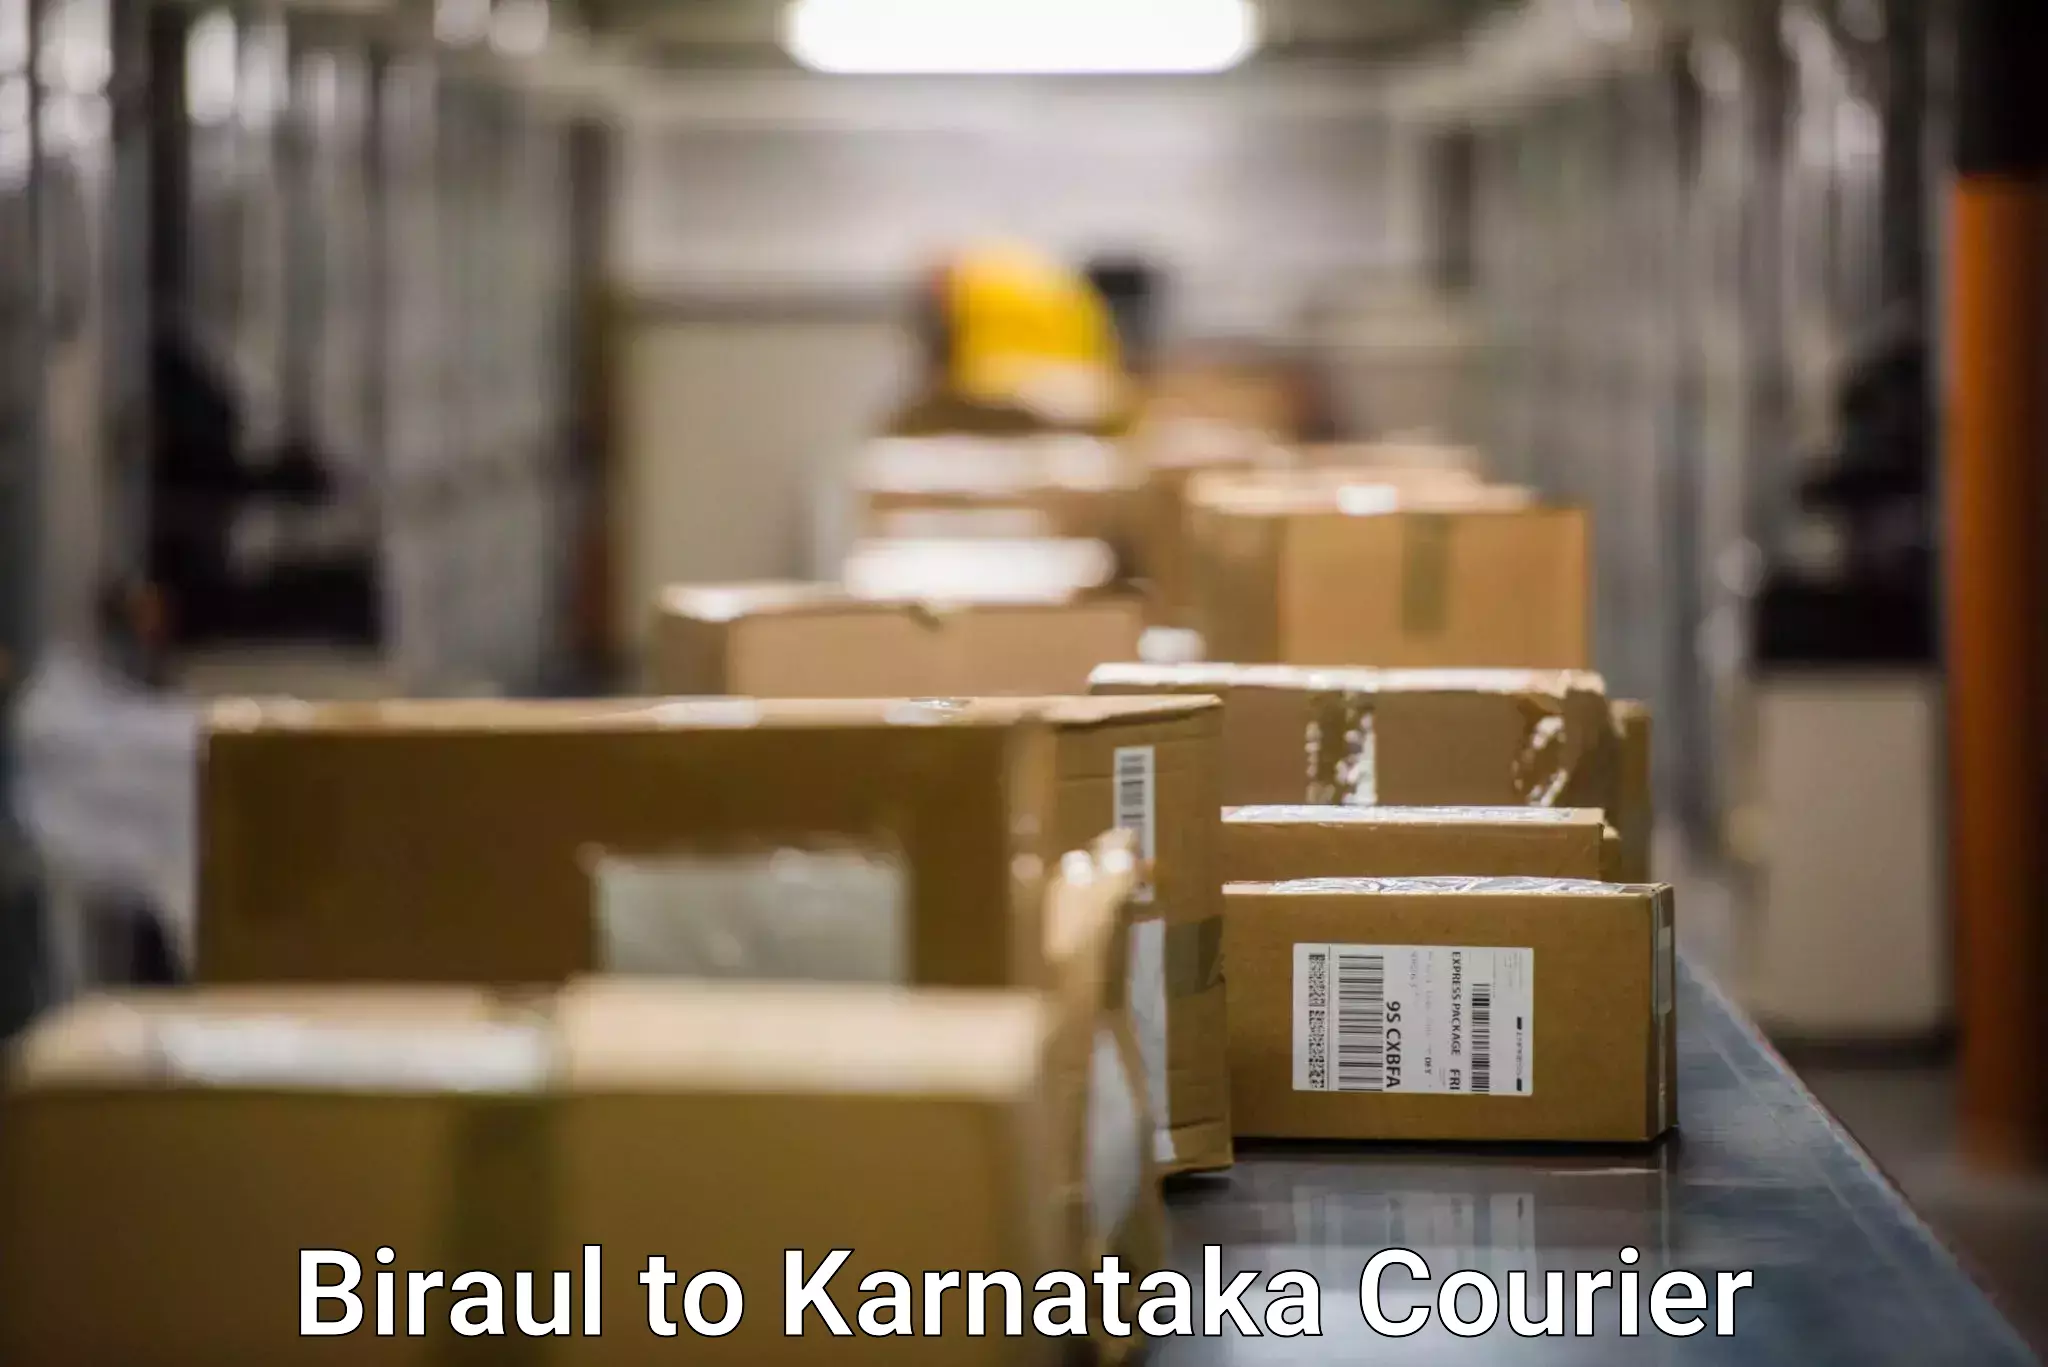 On-demand shipping options Biraul to Manipal